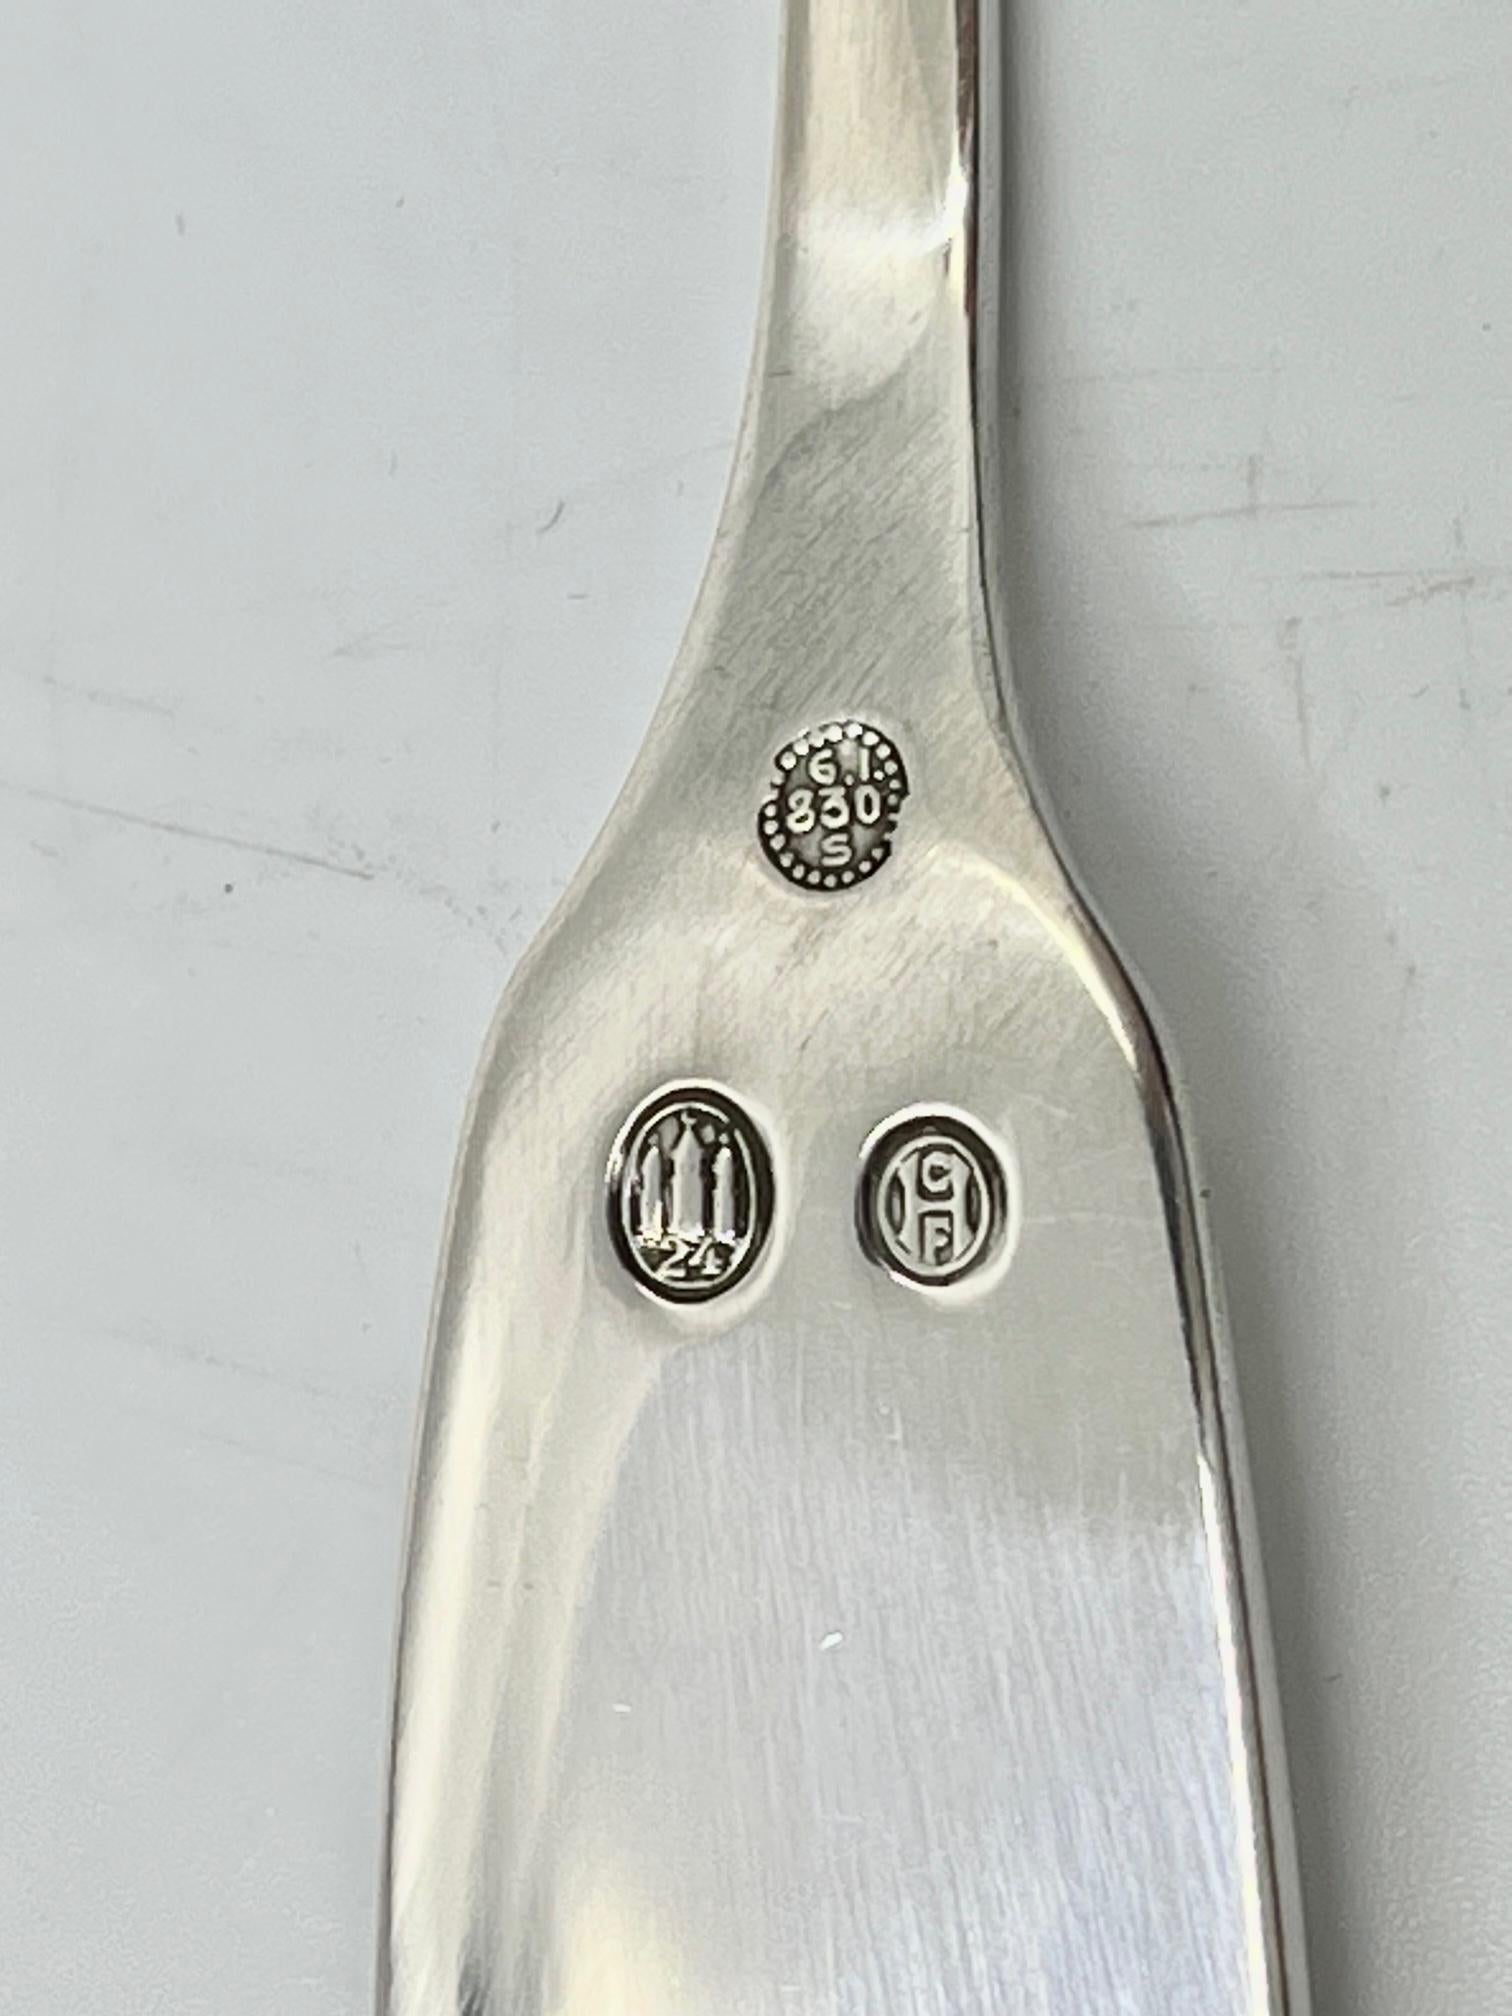 A rare Georg Jensen silver fish knife, item #062 in the Akkeleje pattern, design #77 by Georg Jensen from 1918. There is no English name for this pattern.

Additional information:
Material: Sterling silver
Styles: Art Nouveau
Hallmarks: Hallmarks: